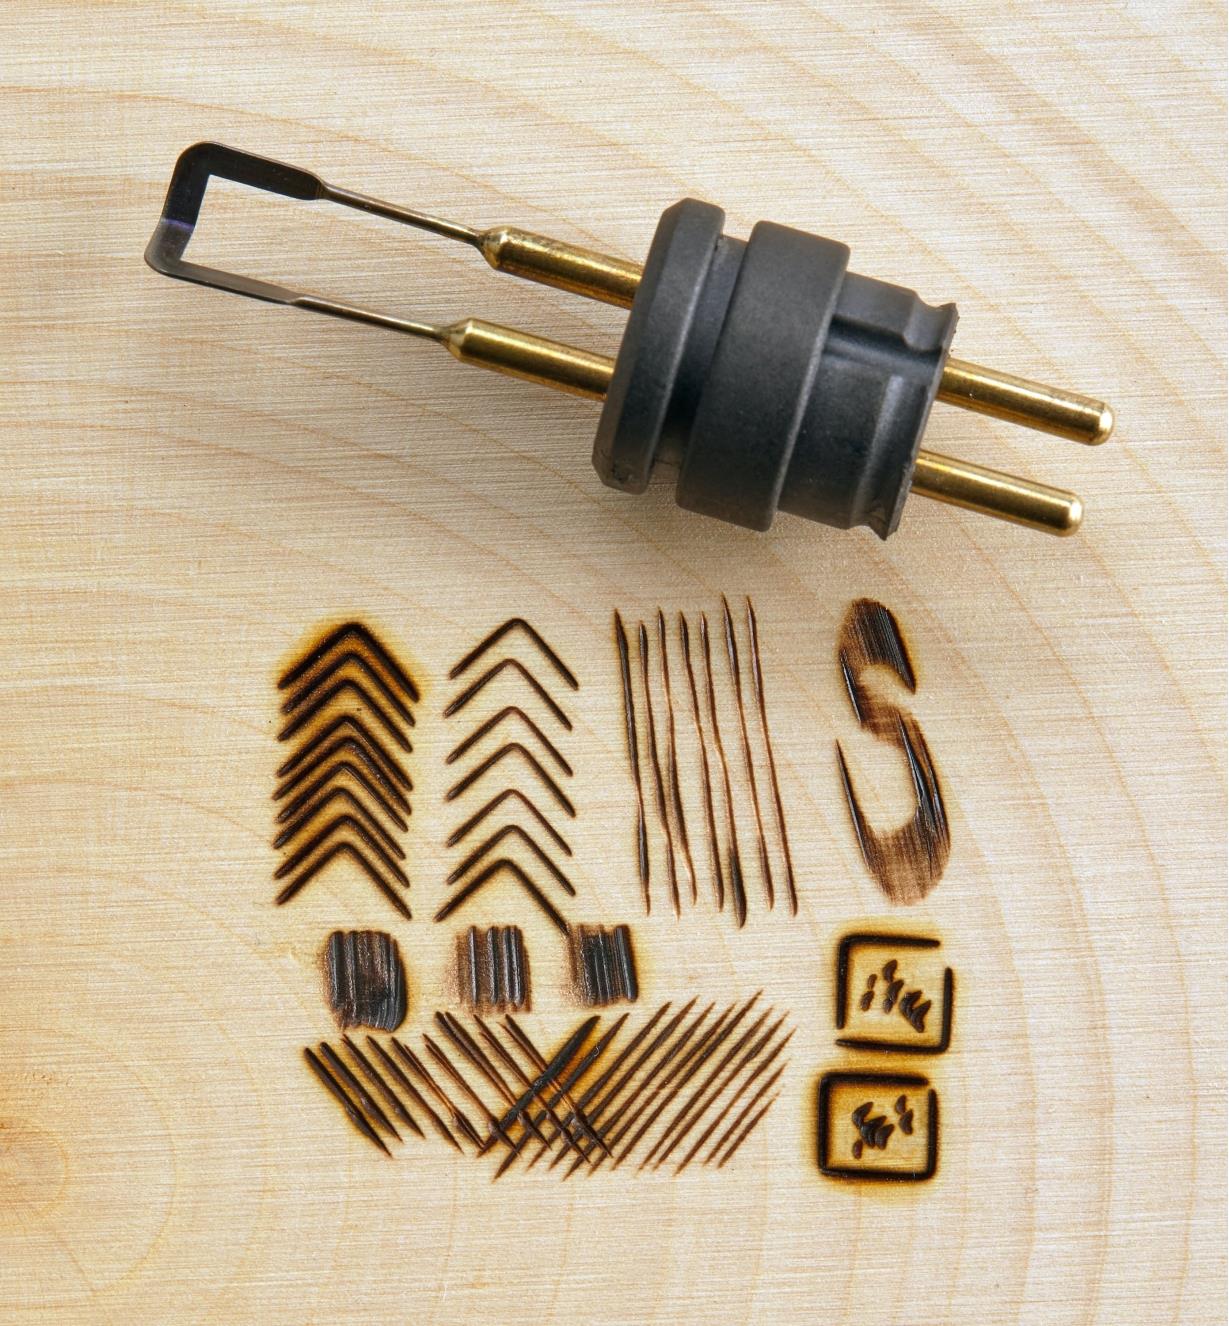 A stamping point tip on a wood background next to geometric burn designs